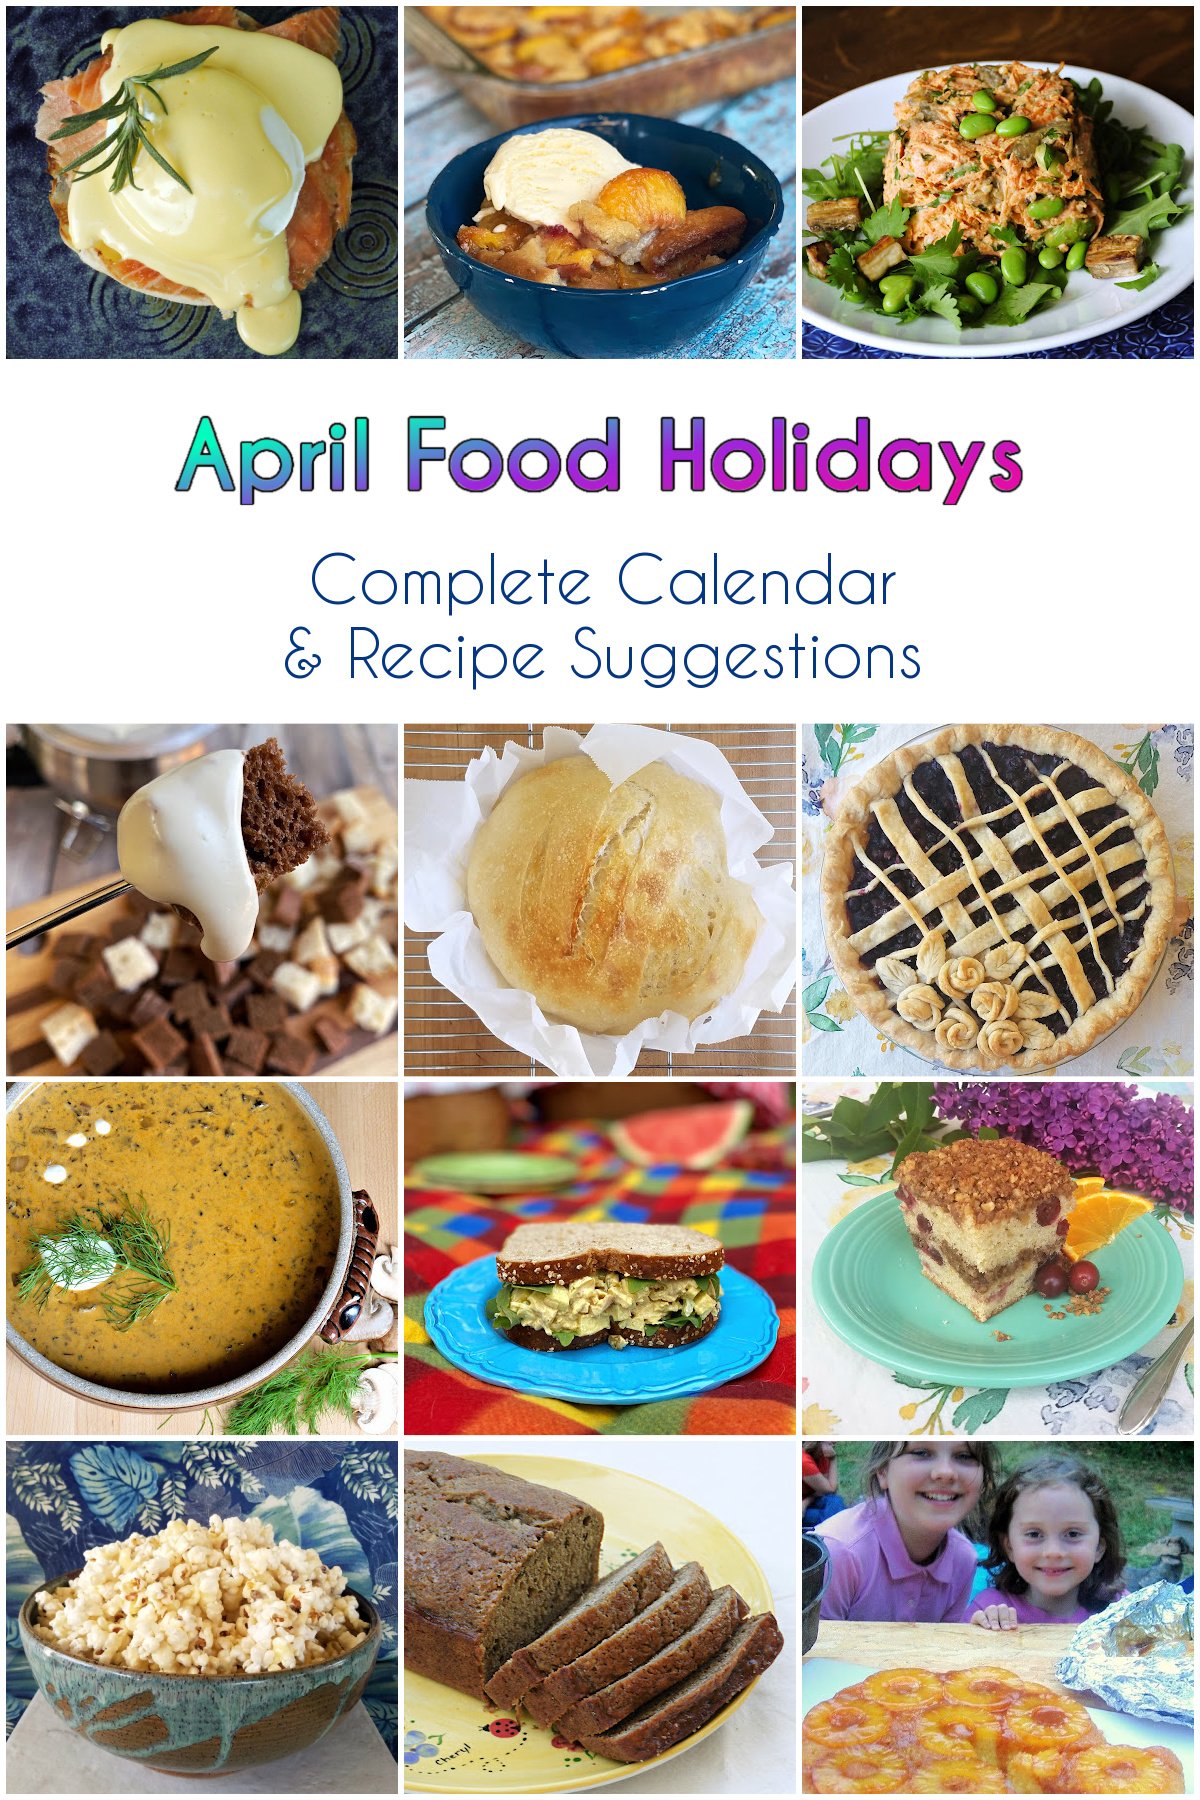 12-panel collage showing images of foods from recipes with text centered between reading "April Food Holidays, Calendar & Recipes."